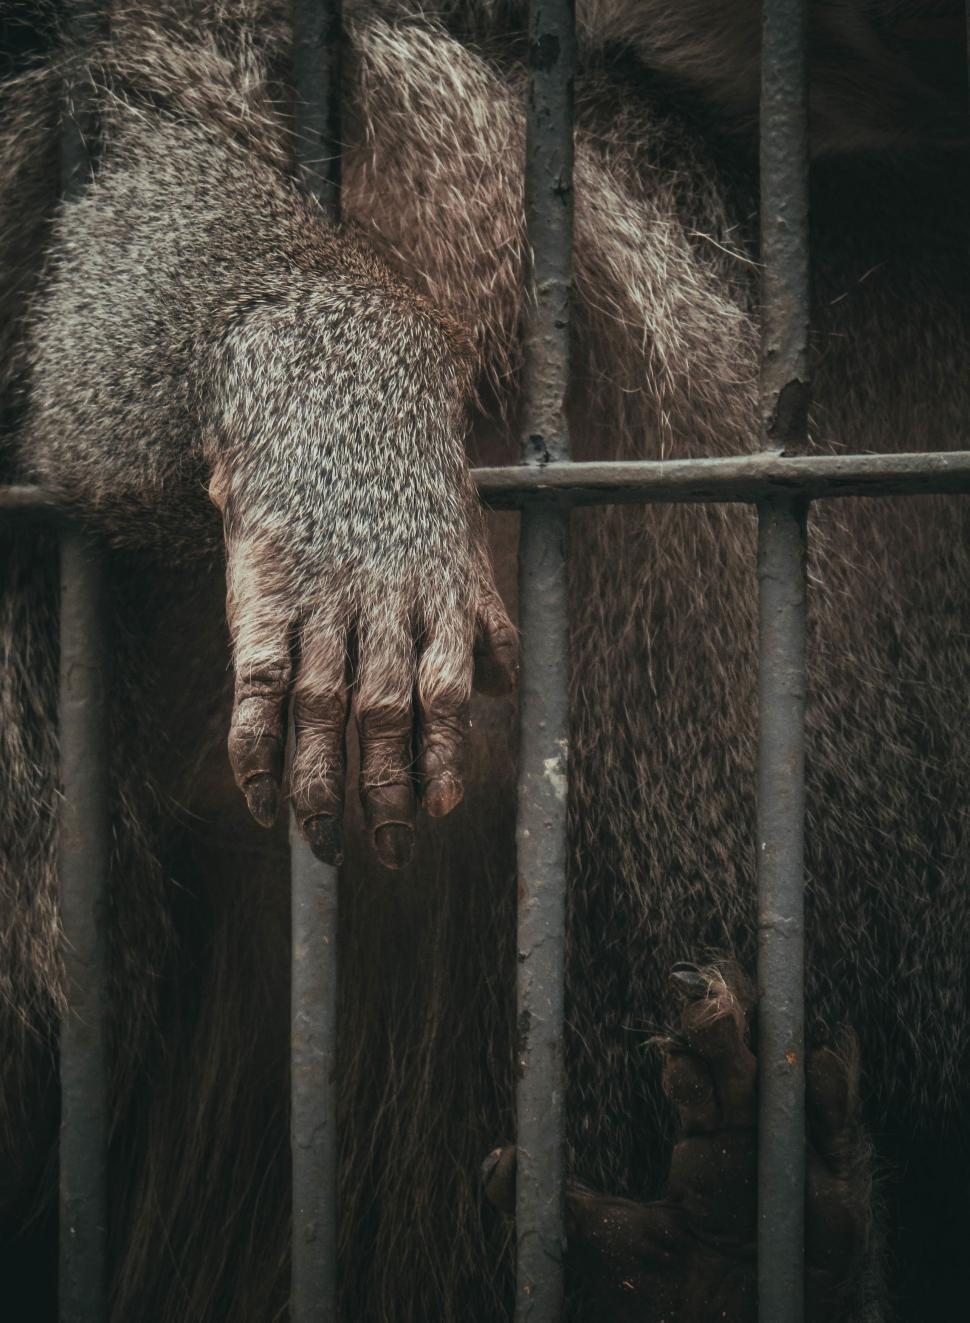 Free Image of Bears Paw Emerging From Jail Cell Bars 